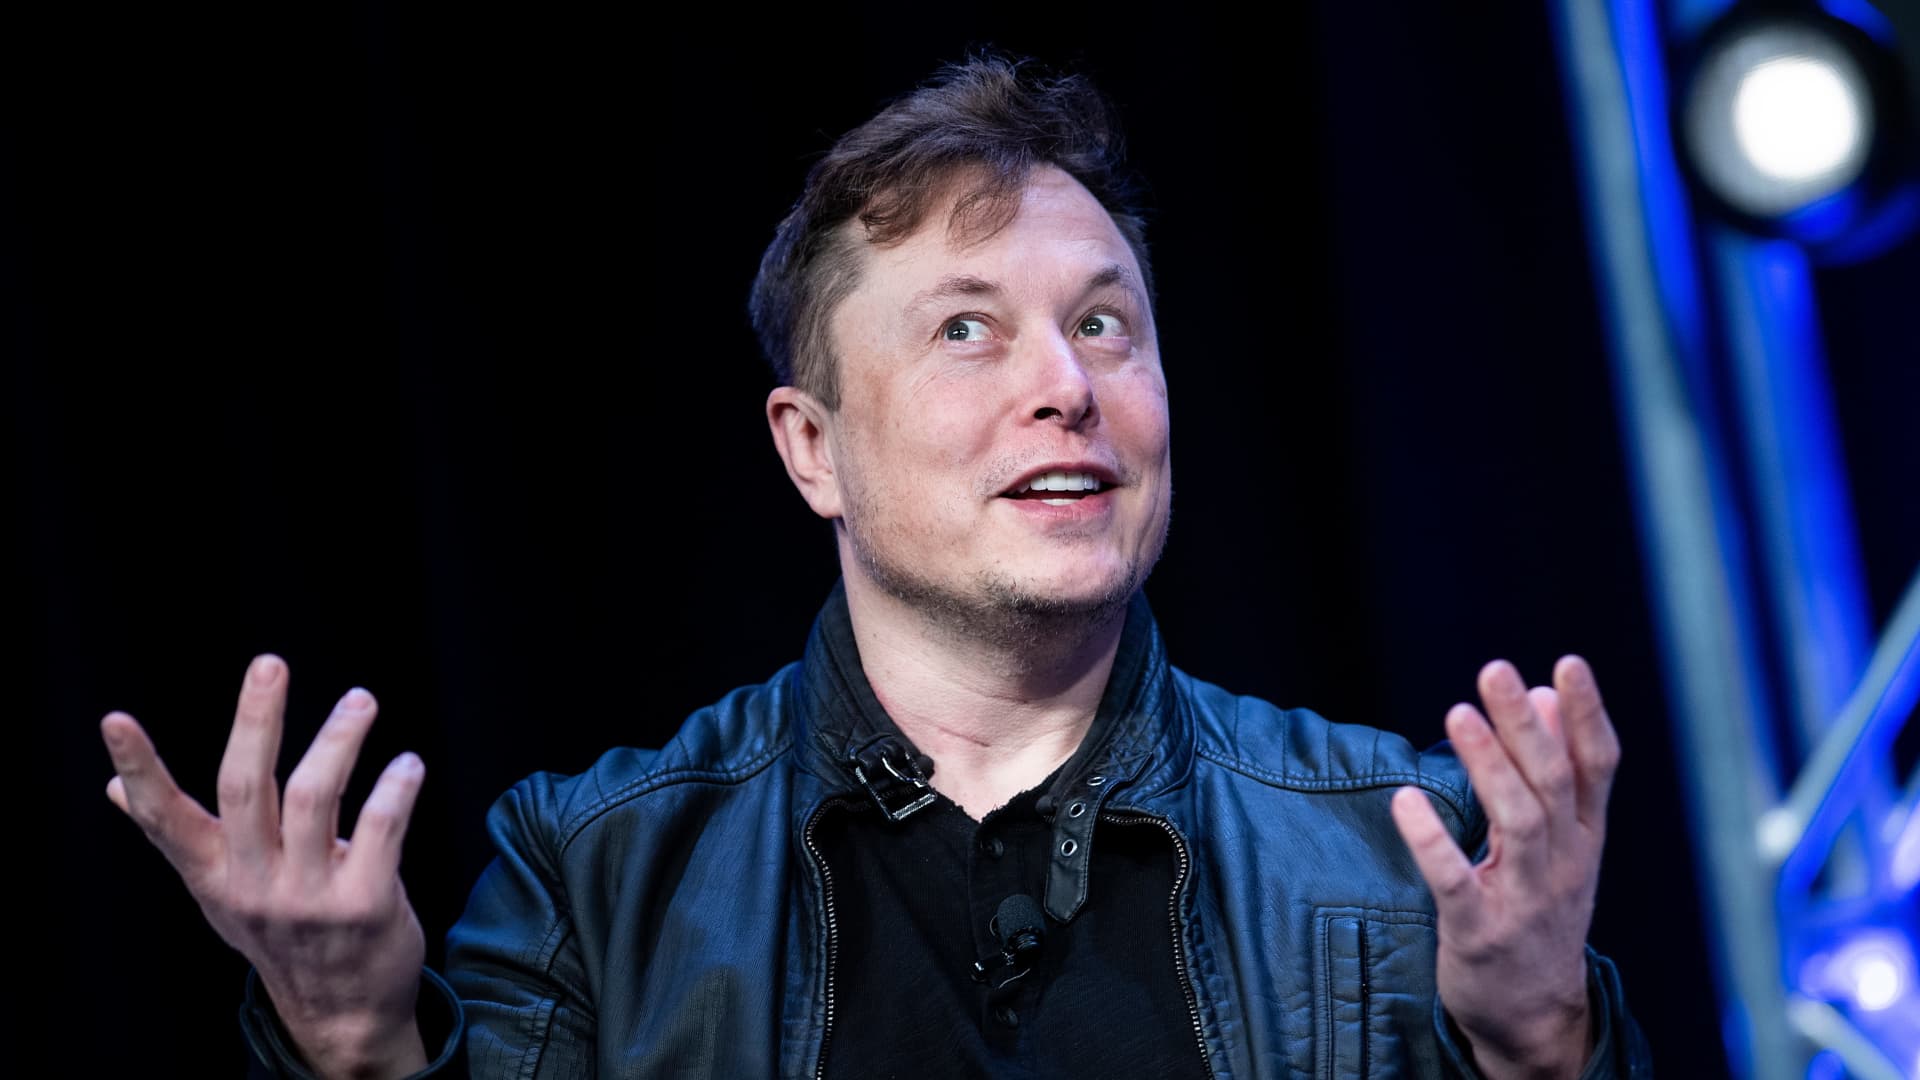 It seems unlikely Musk will get private equity funding for Twitter purchase